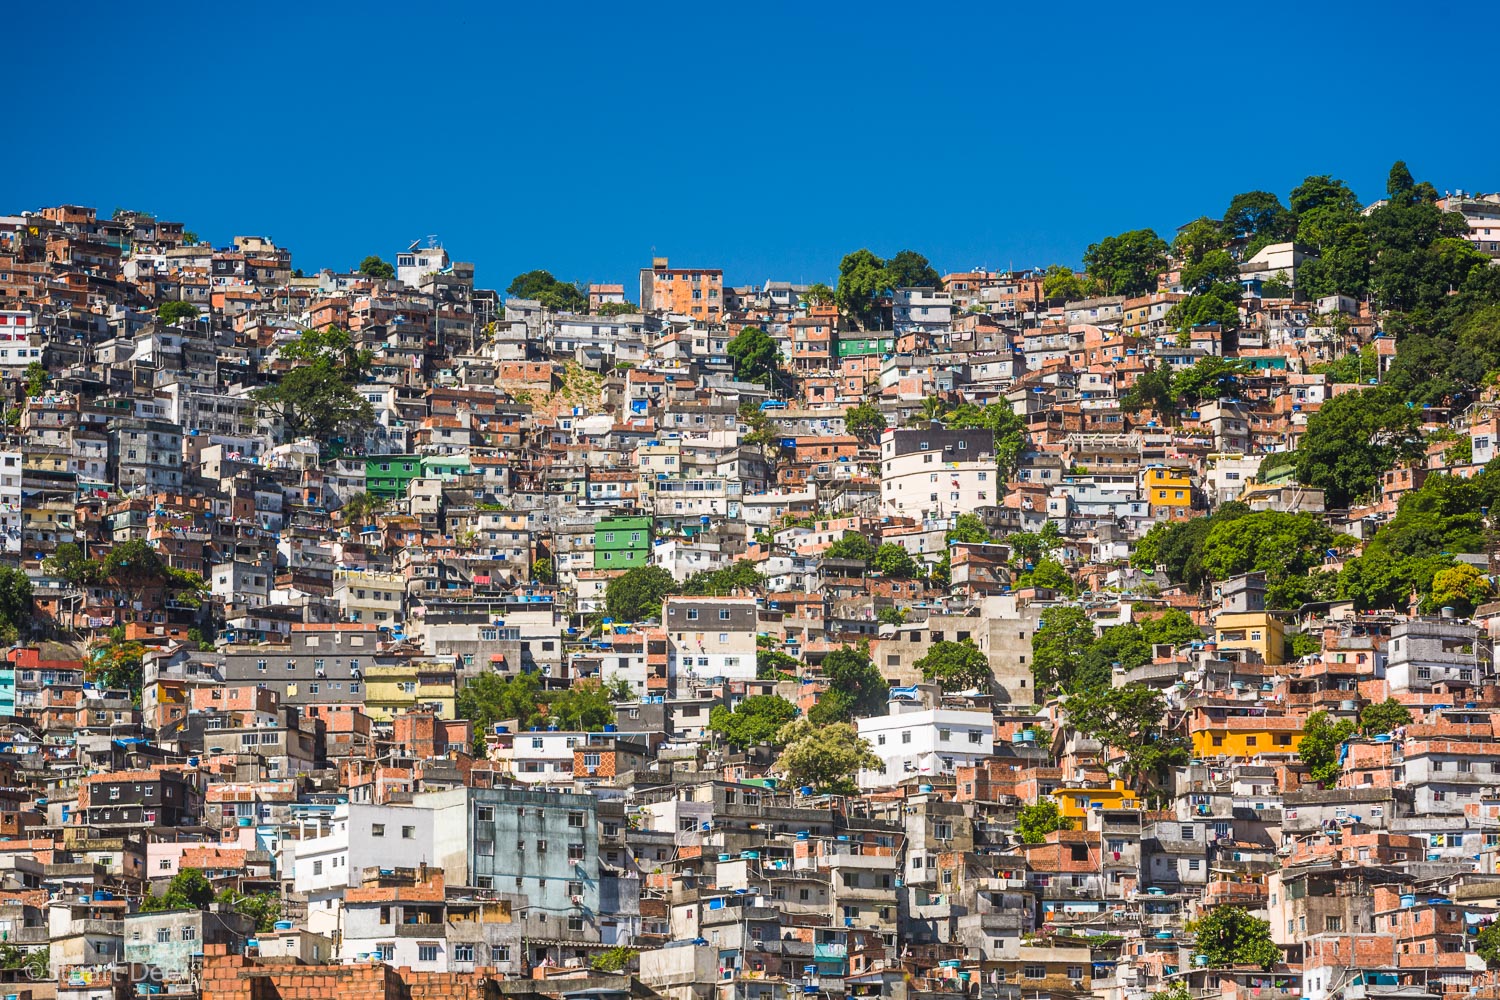  Favela Rocinha, Rio de Janeiro, Brazil. 
Rocinha is the largest and most well known favela in Brazil. It's located within the South Zone of Rio de Janeiro, between the districts of São Conrado and Gávea. Built on a steep hillside overlooking the cit